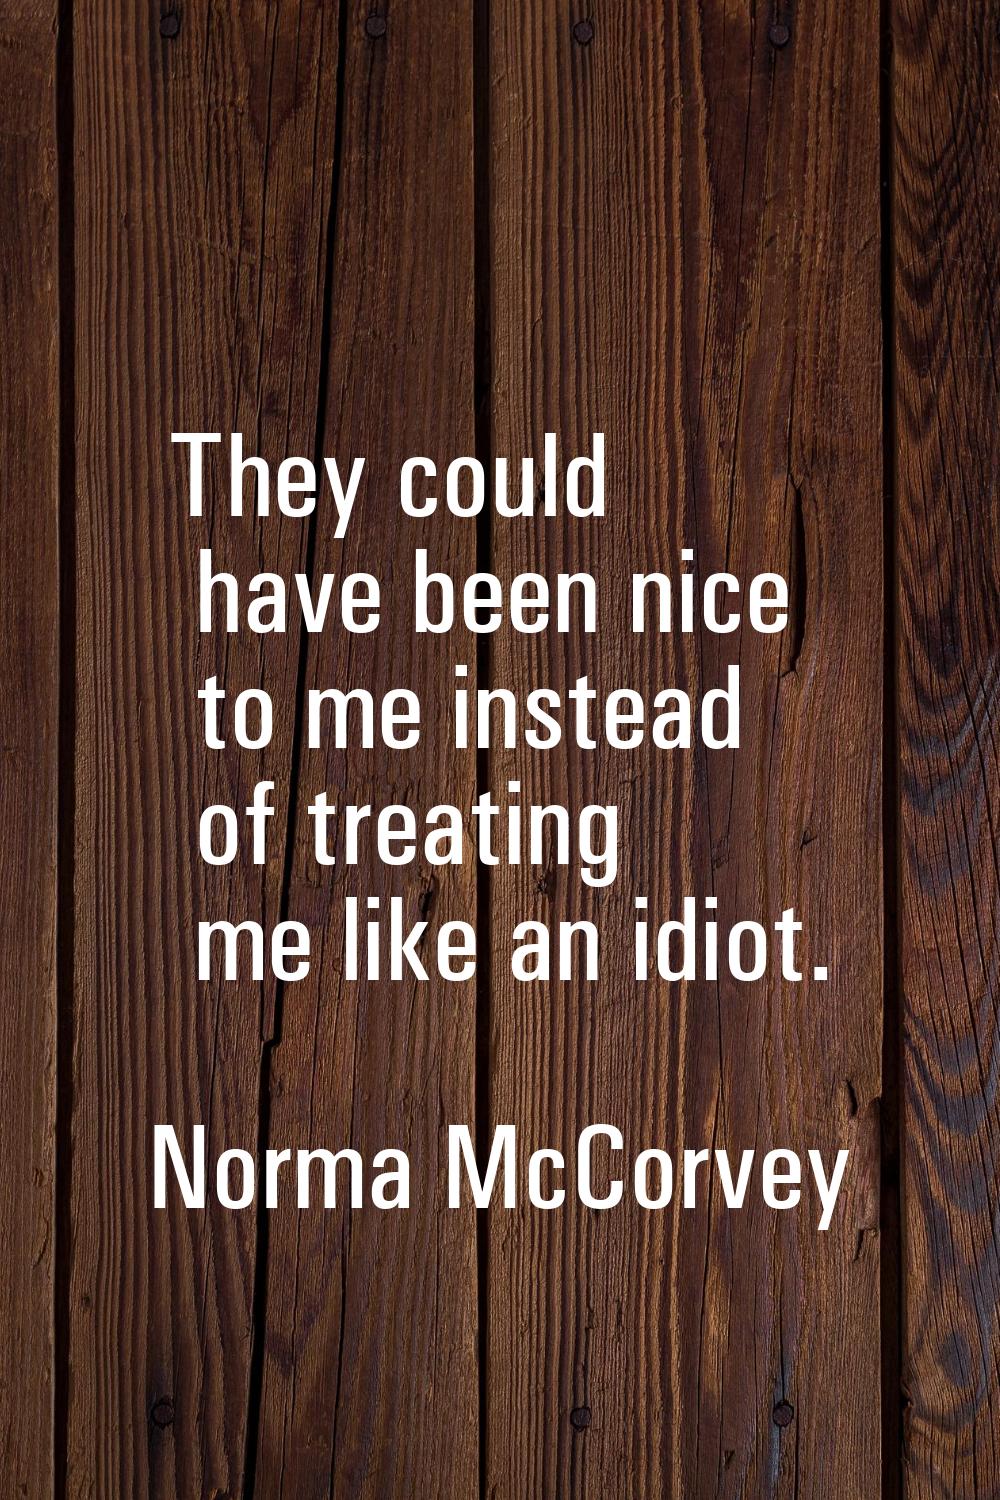 They could have been nice to me instead of treating me like an idiot.